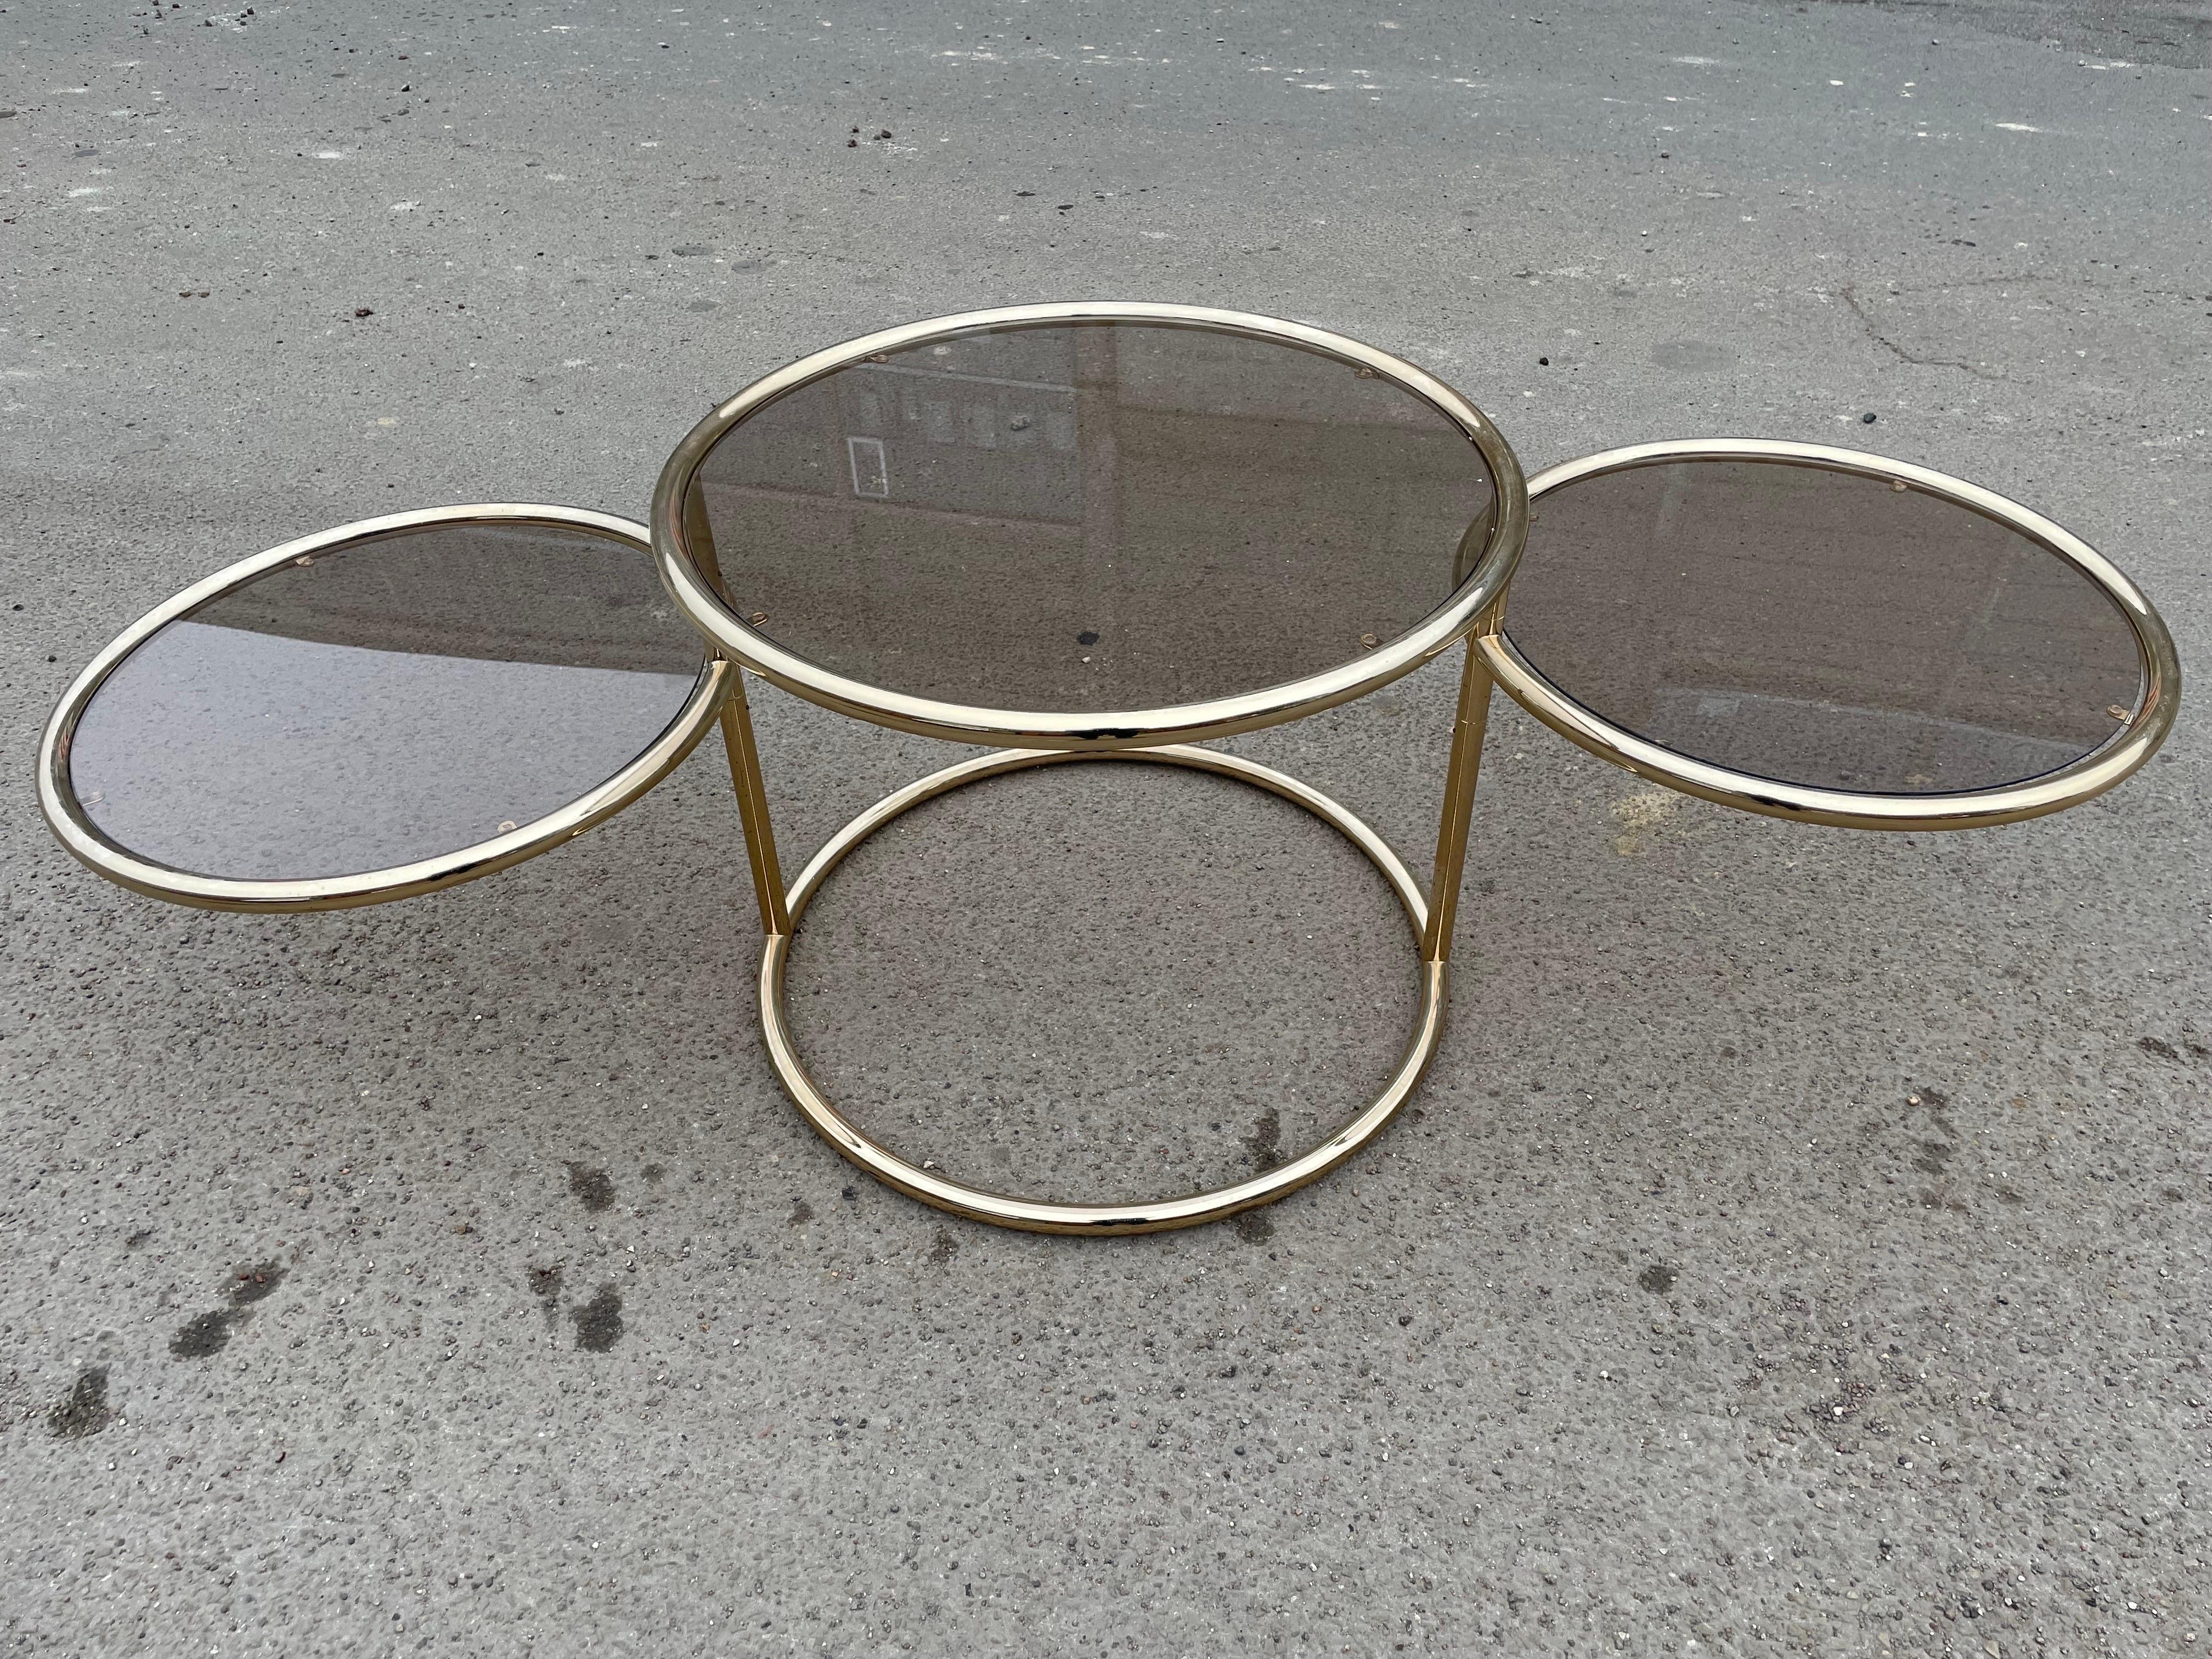 A versatile cocktail table comprised of three tiers of polished brass tubular framed glass tables; The two tables have a diameter of 55 cm. Morex, Italian, circa 1970